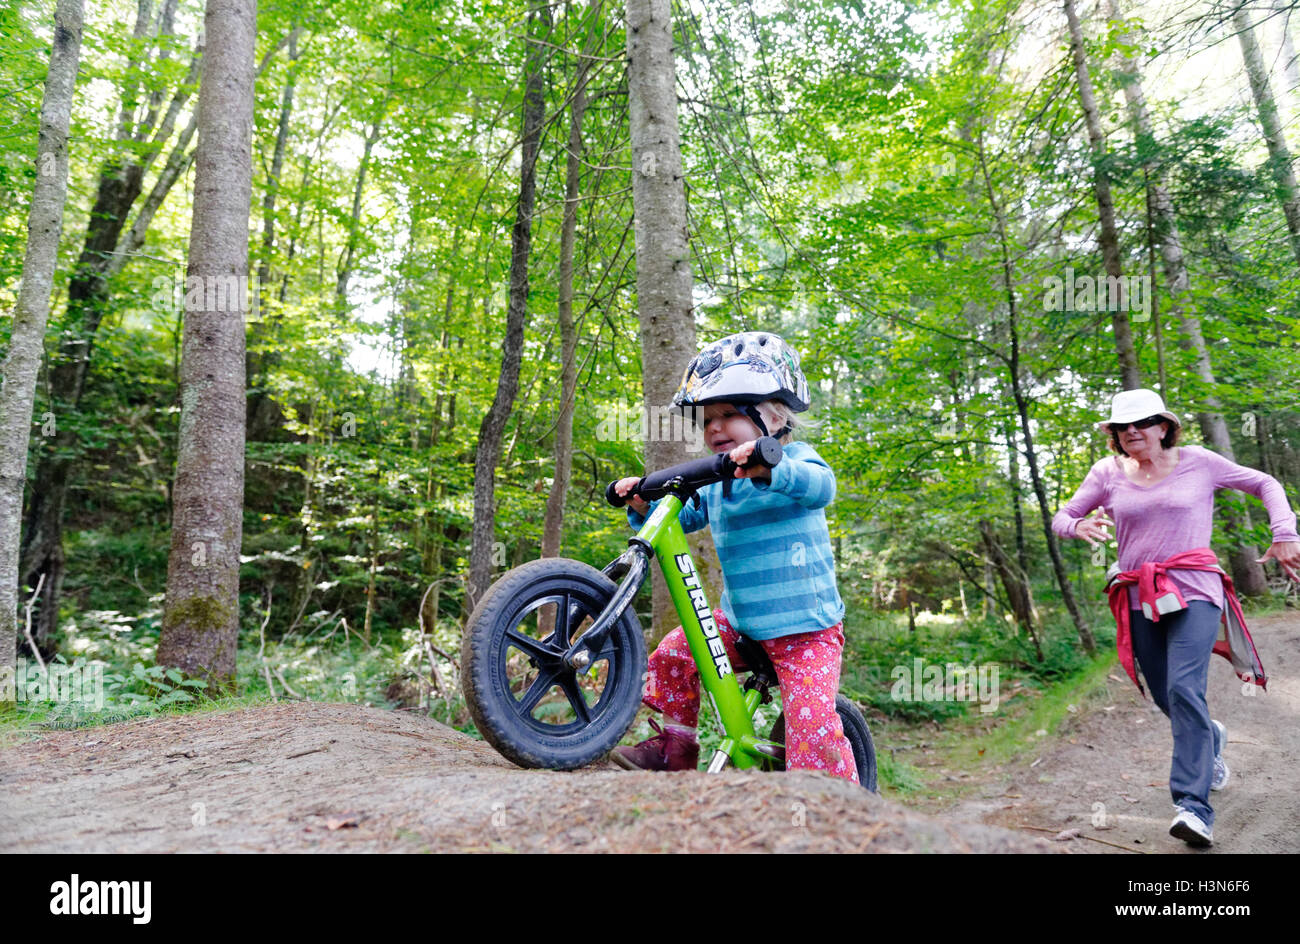 A 2 yr old girl on a balance bike with her grandmother fearfully chasing. Taken on Leapfrog pump track at Kingdom Trails Vermont Stock Photo